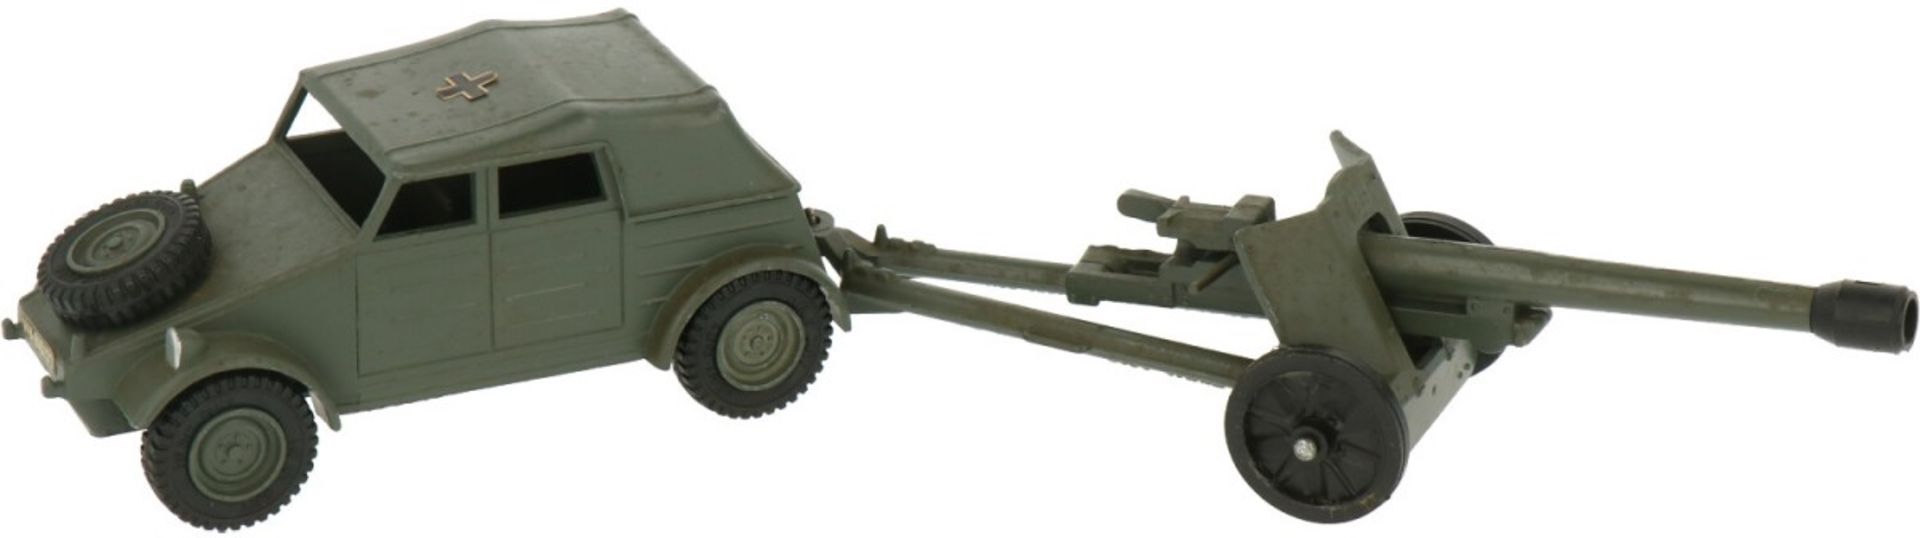 Dinky toys 617 Volkswagen KDF with 50mm P.A.K. anti tank gun - Image 2 of 3